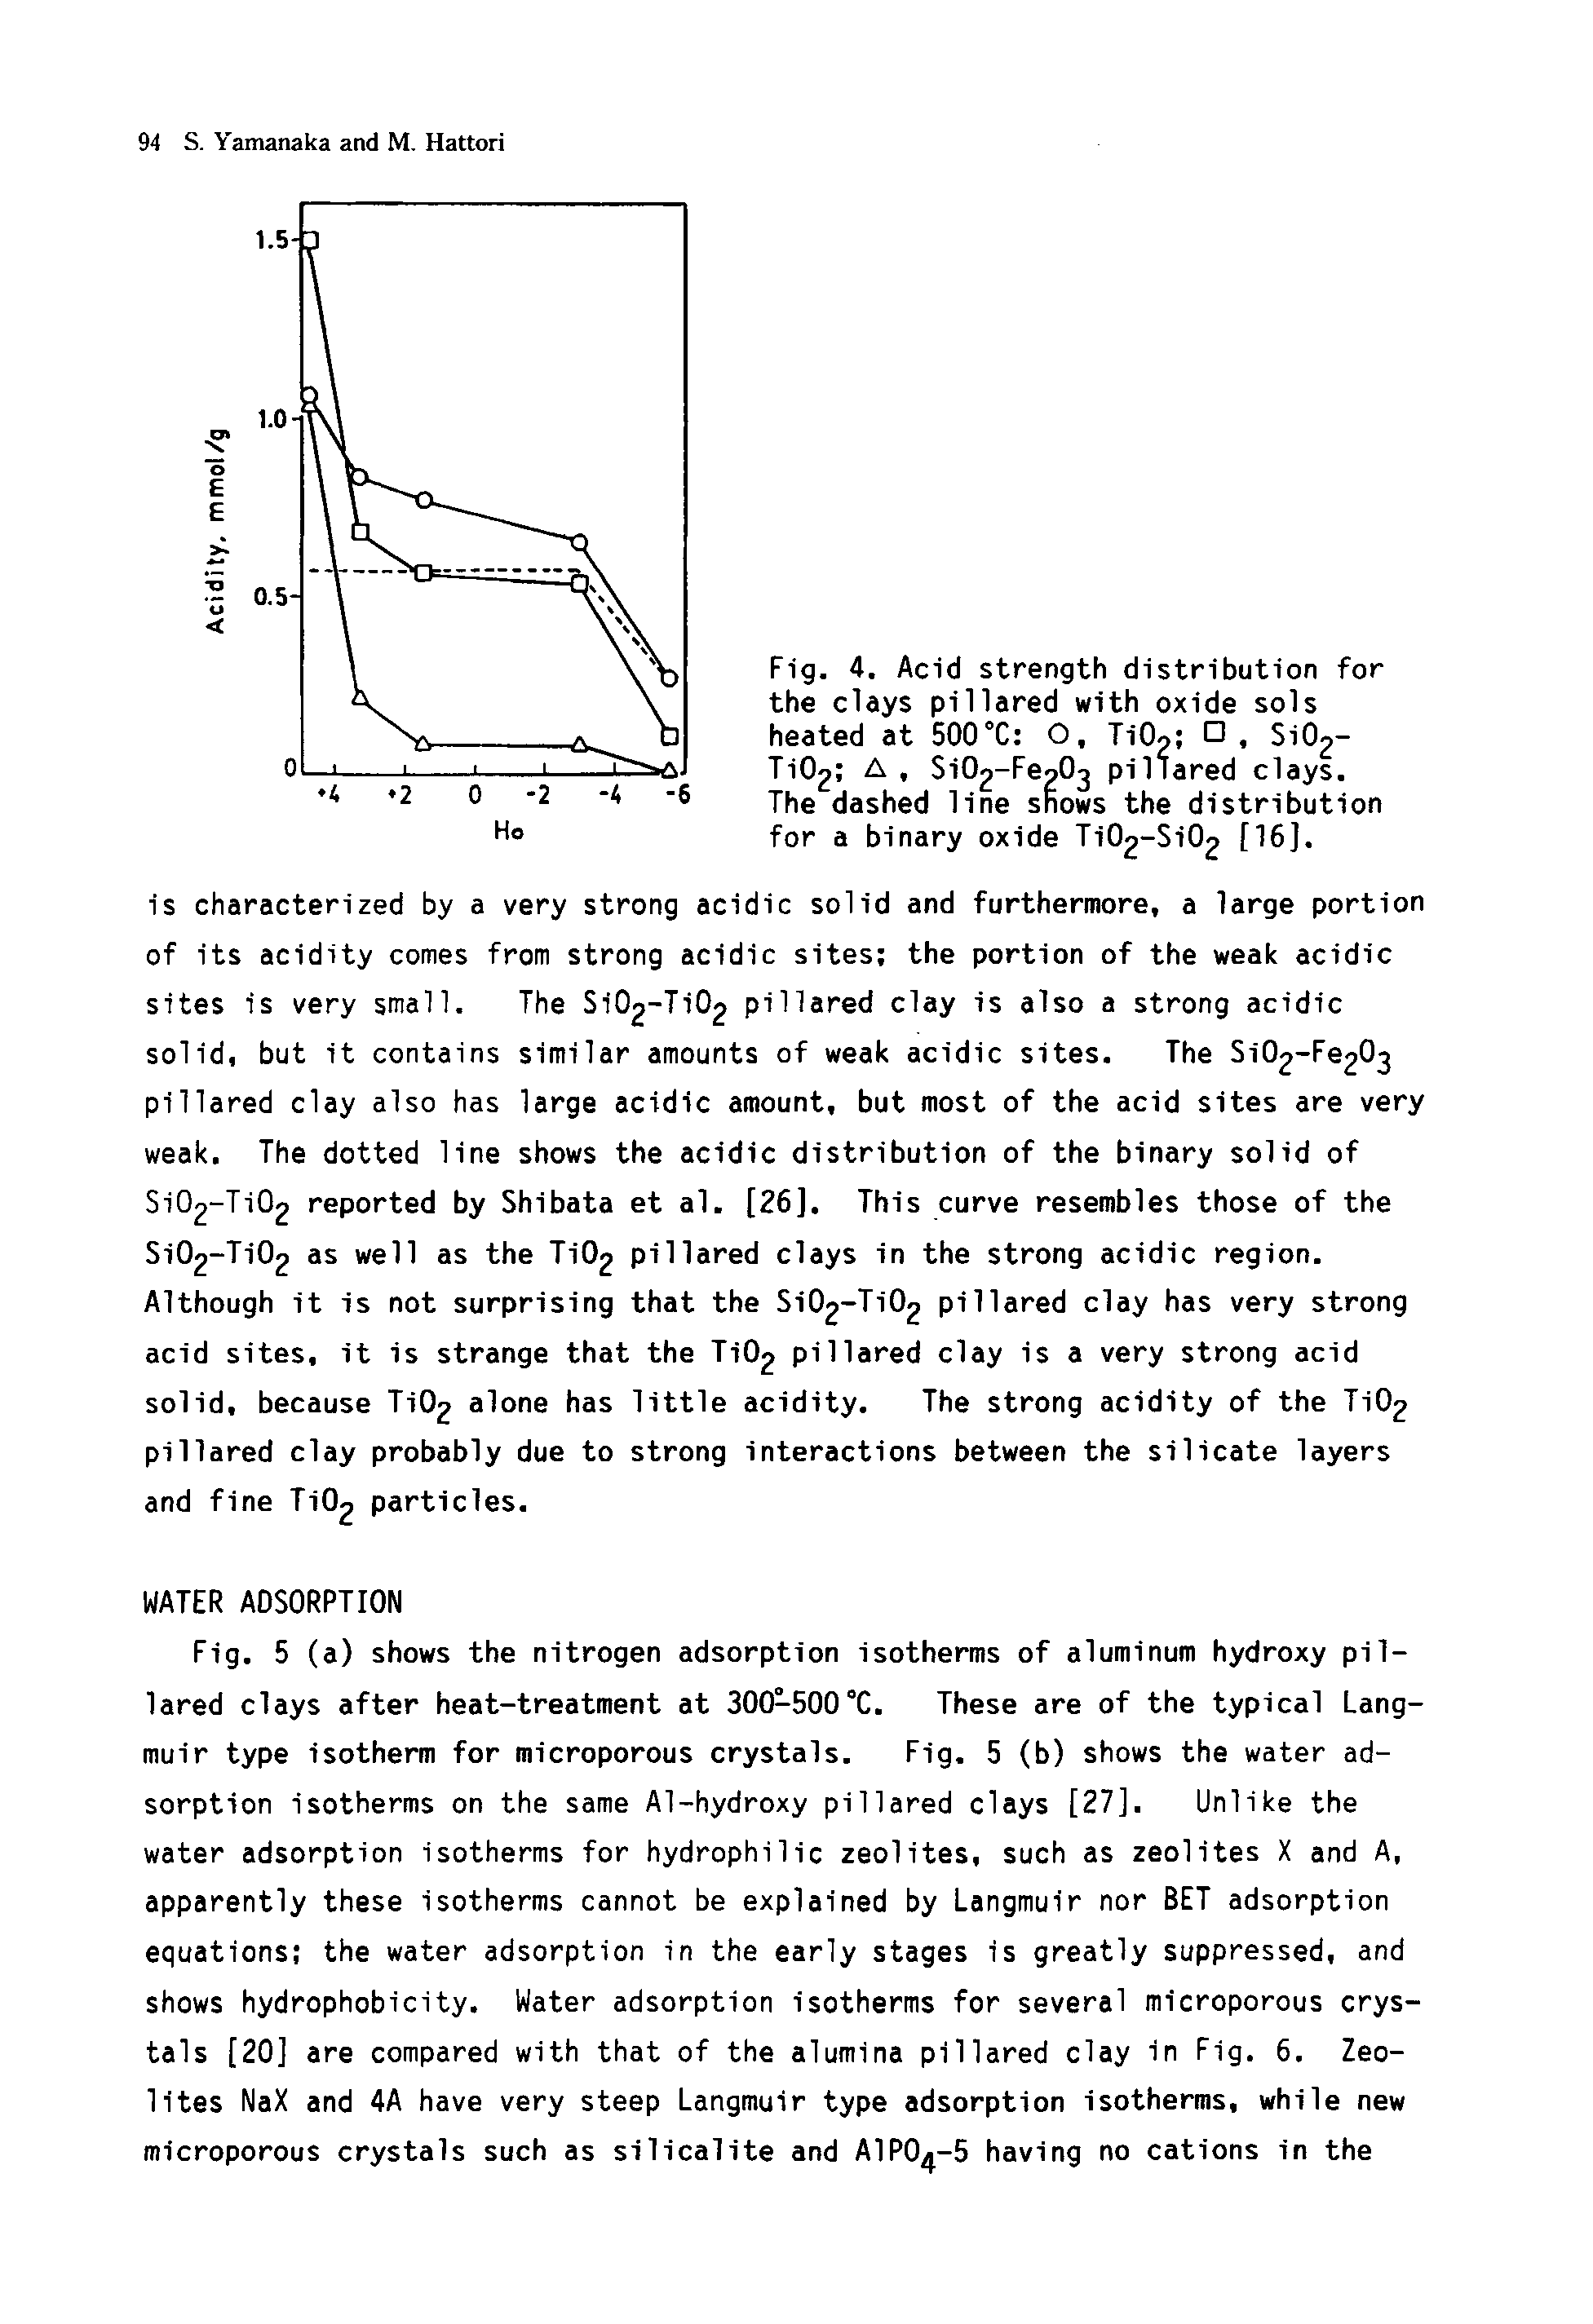 Fig. 4. Acid strength distribution for the clays pillared with oxide sols heated at 500°C O, TiOo F3, Si02 TiO A. Si02-Feo03 pillared clays.